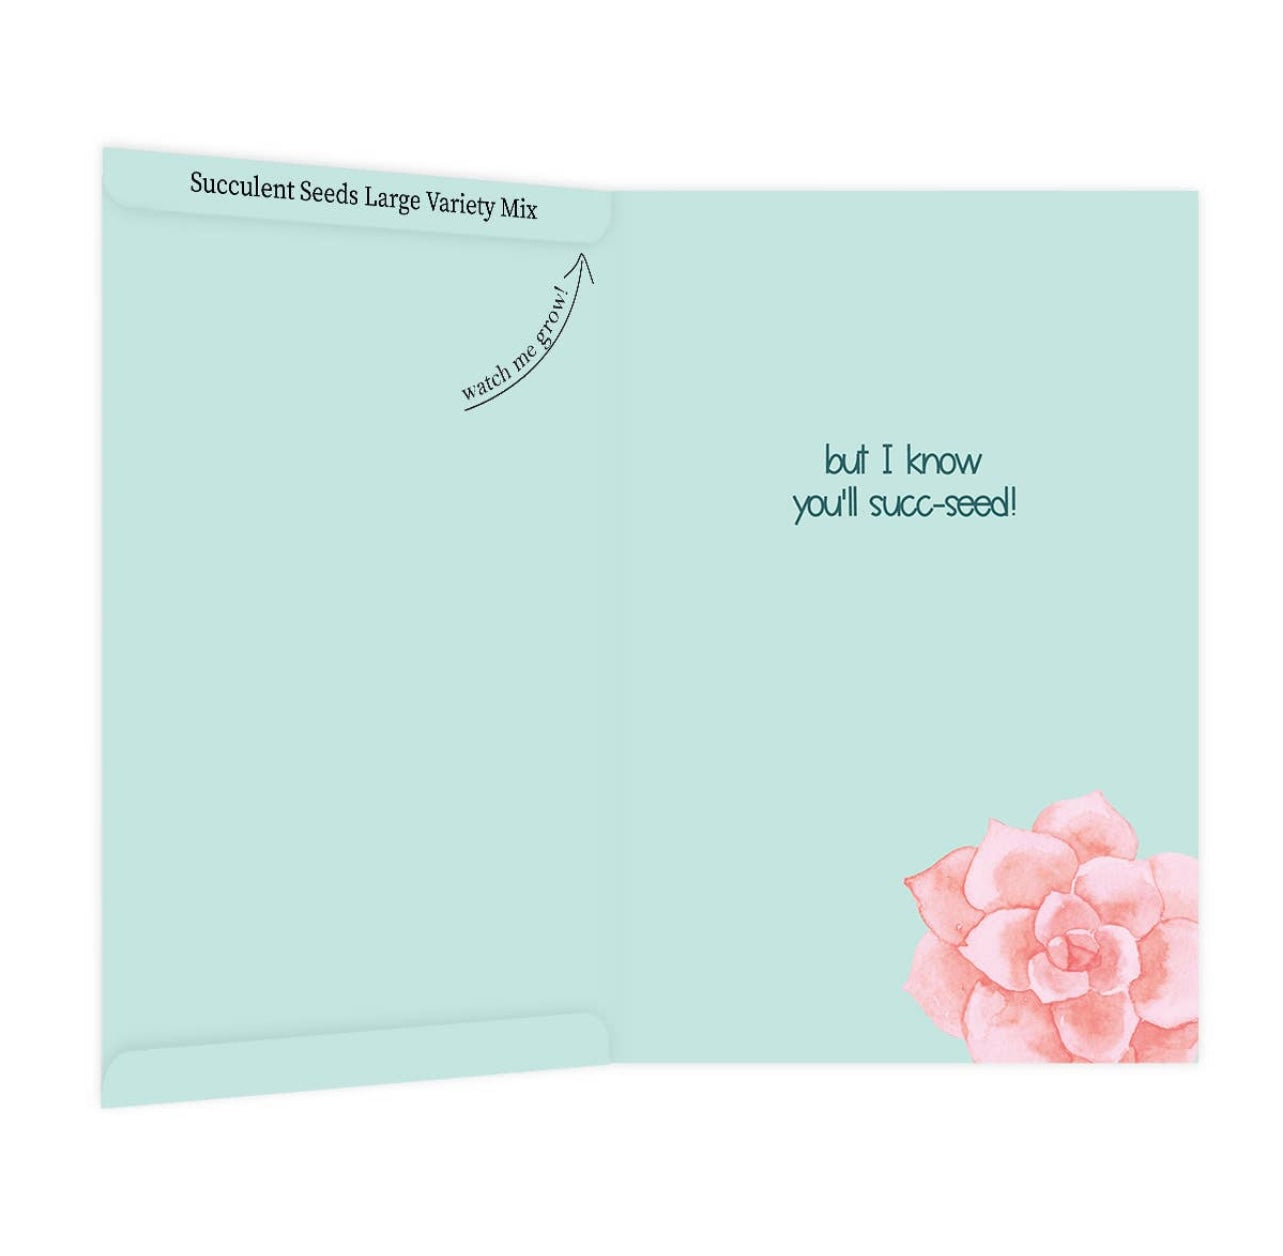 Seeds the day - Being an Adult Succs! - Greeting Card with Succulent Seeds